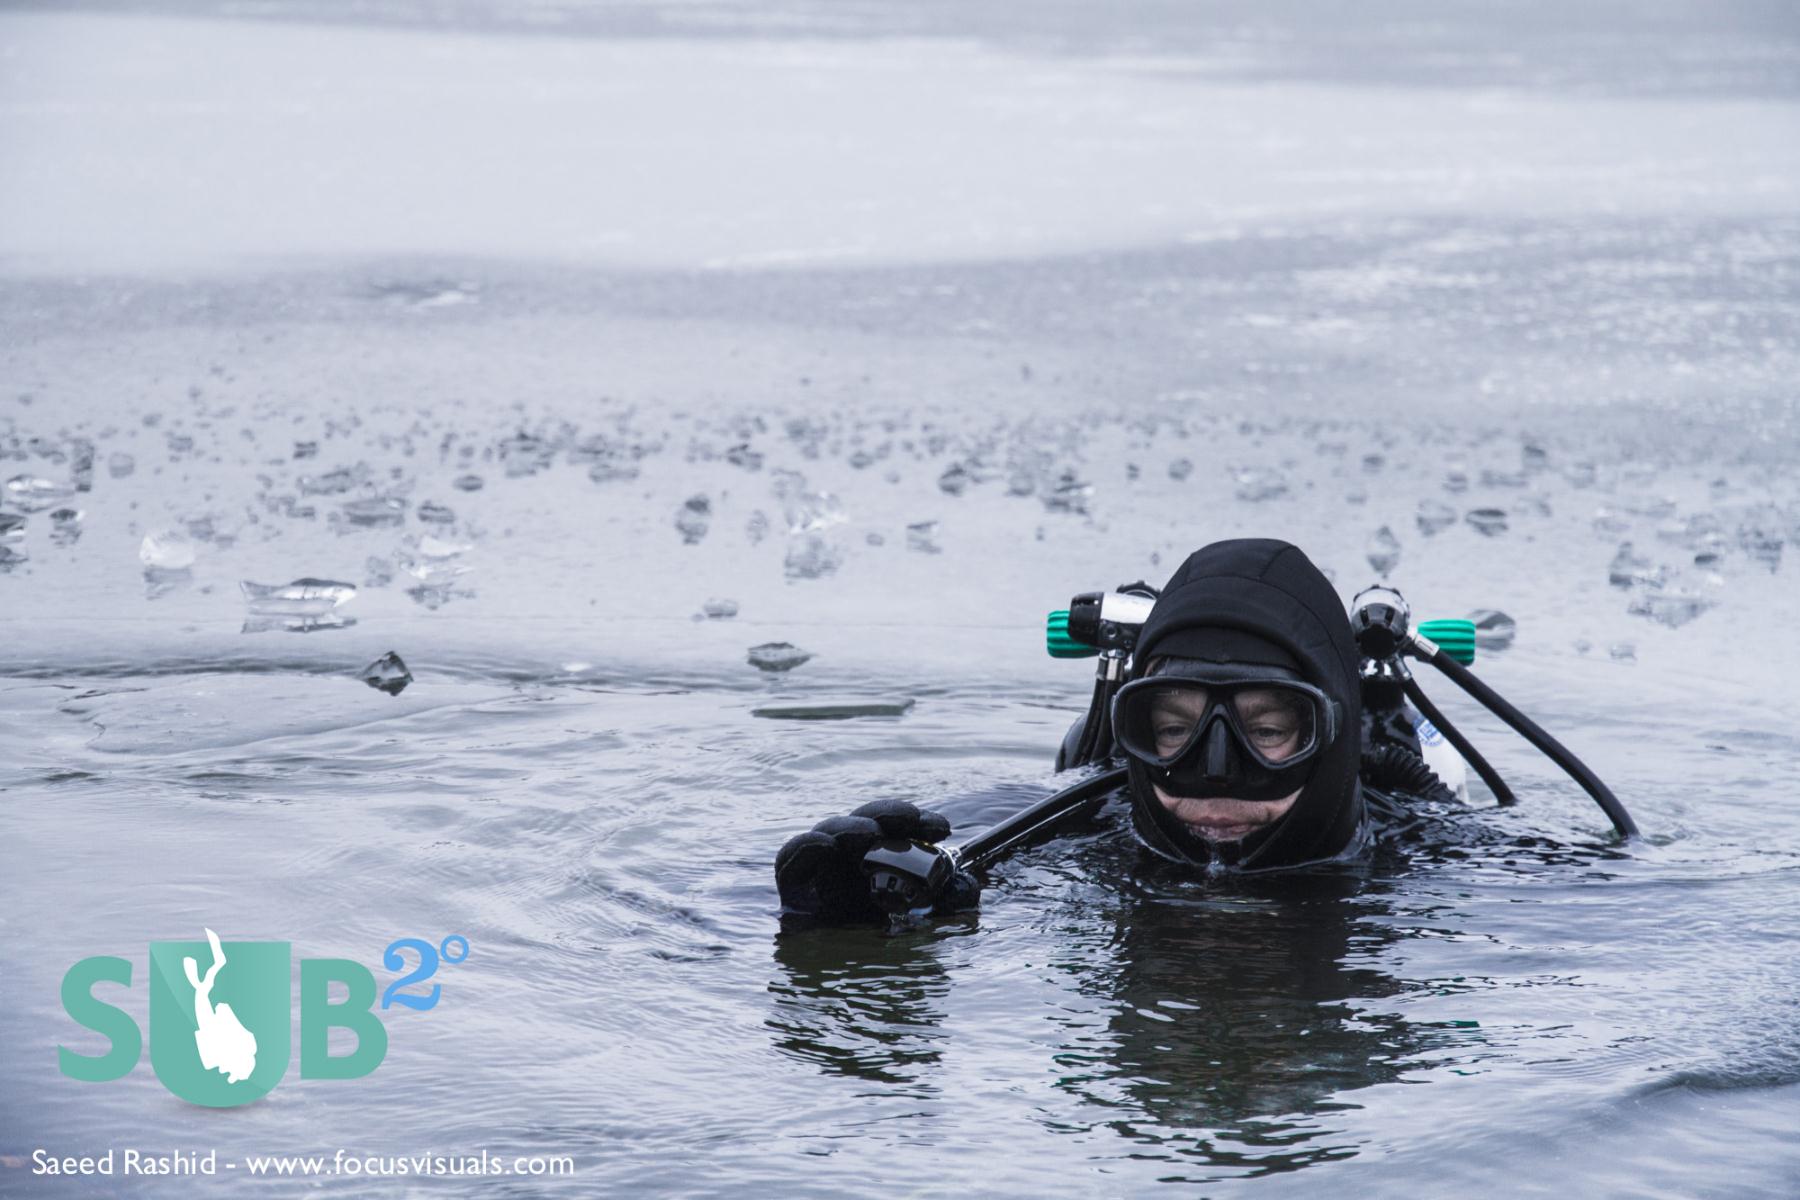 Diver preparing to drop beneath the surface in an icy lake 